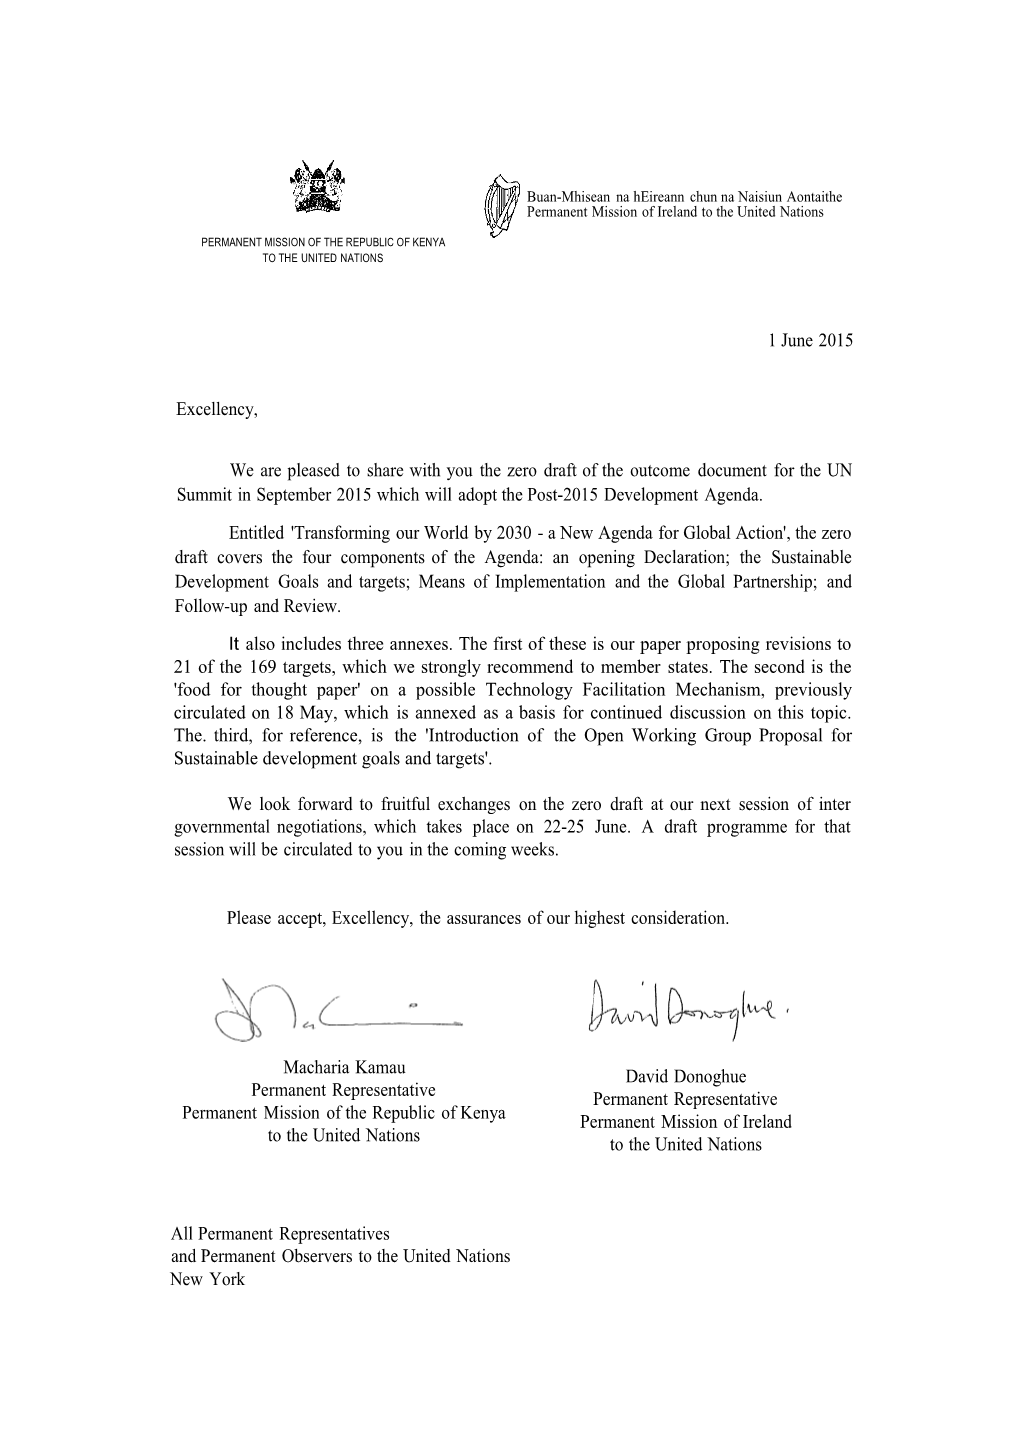 I Have the Pleasure to Forward a Letter from the Co-Facilitators of the Intergovernmental